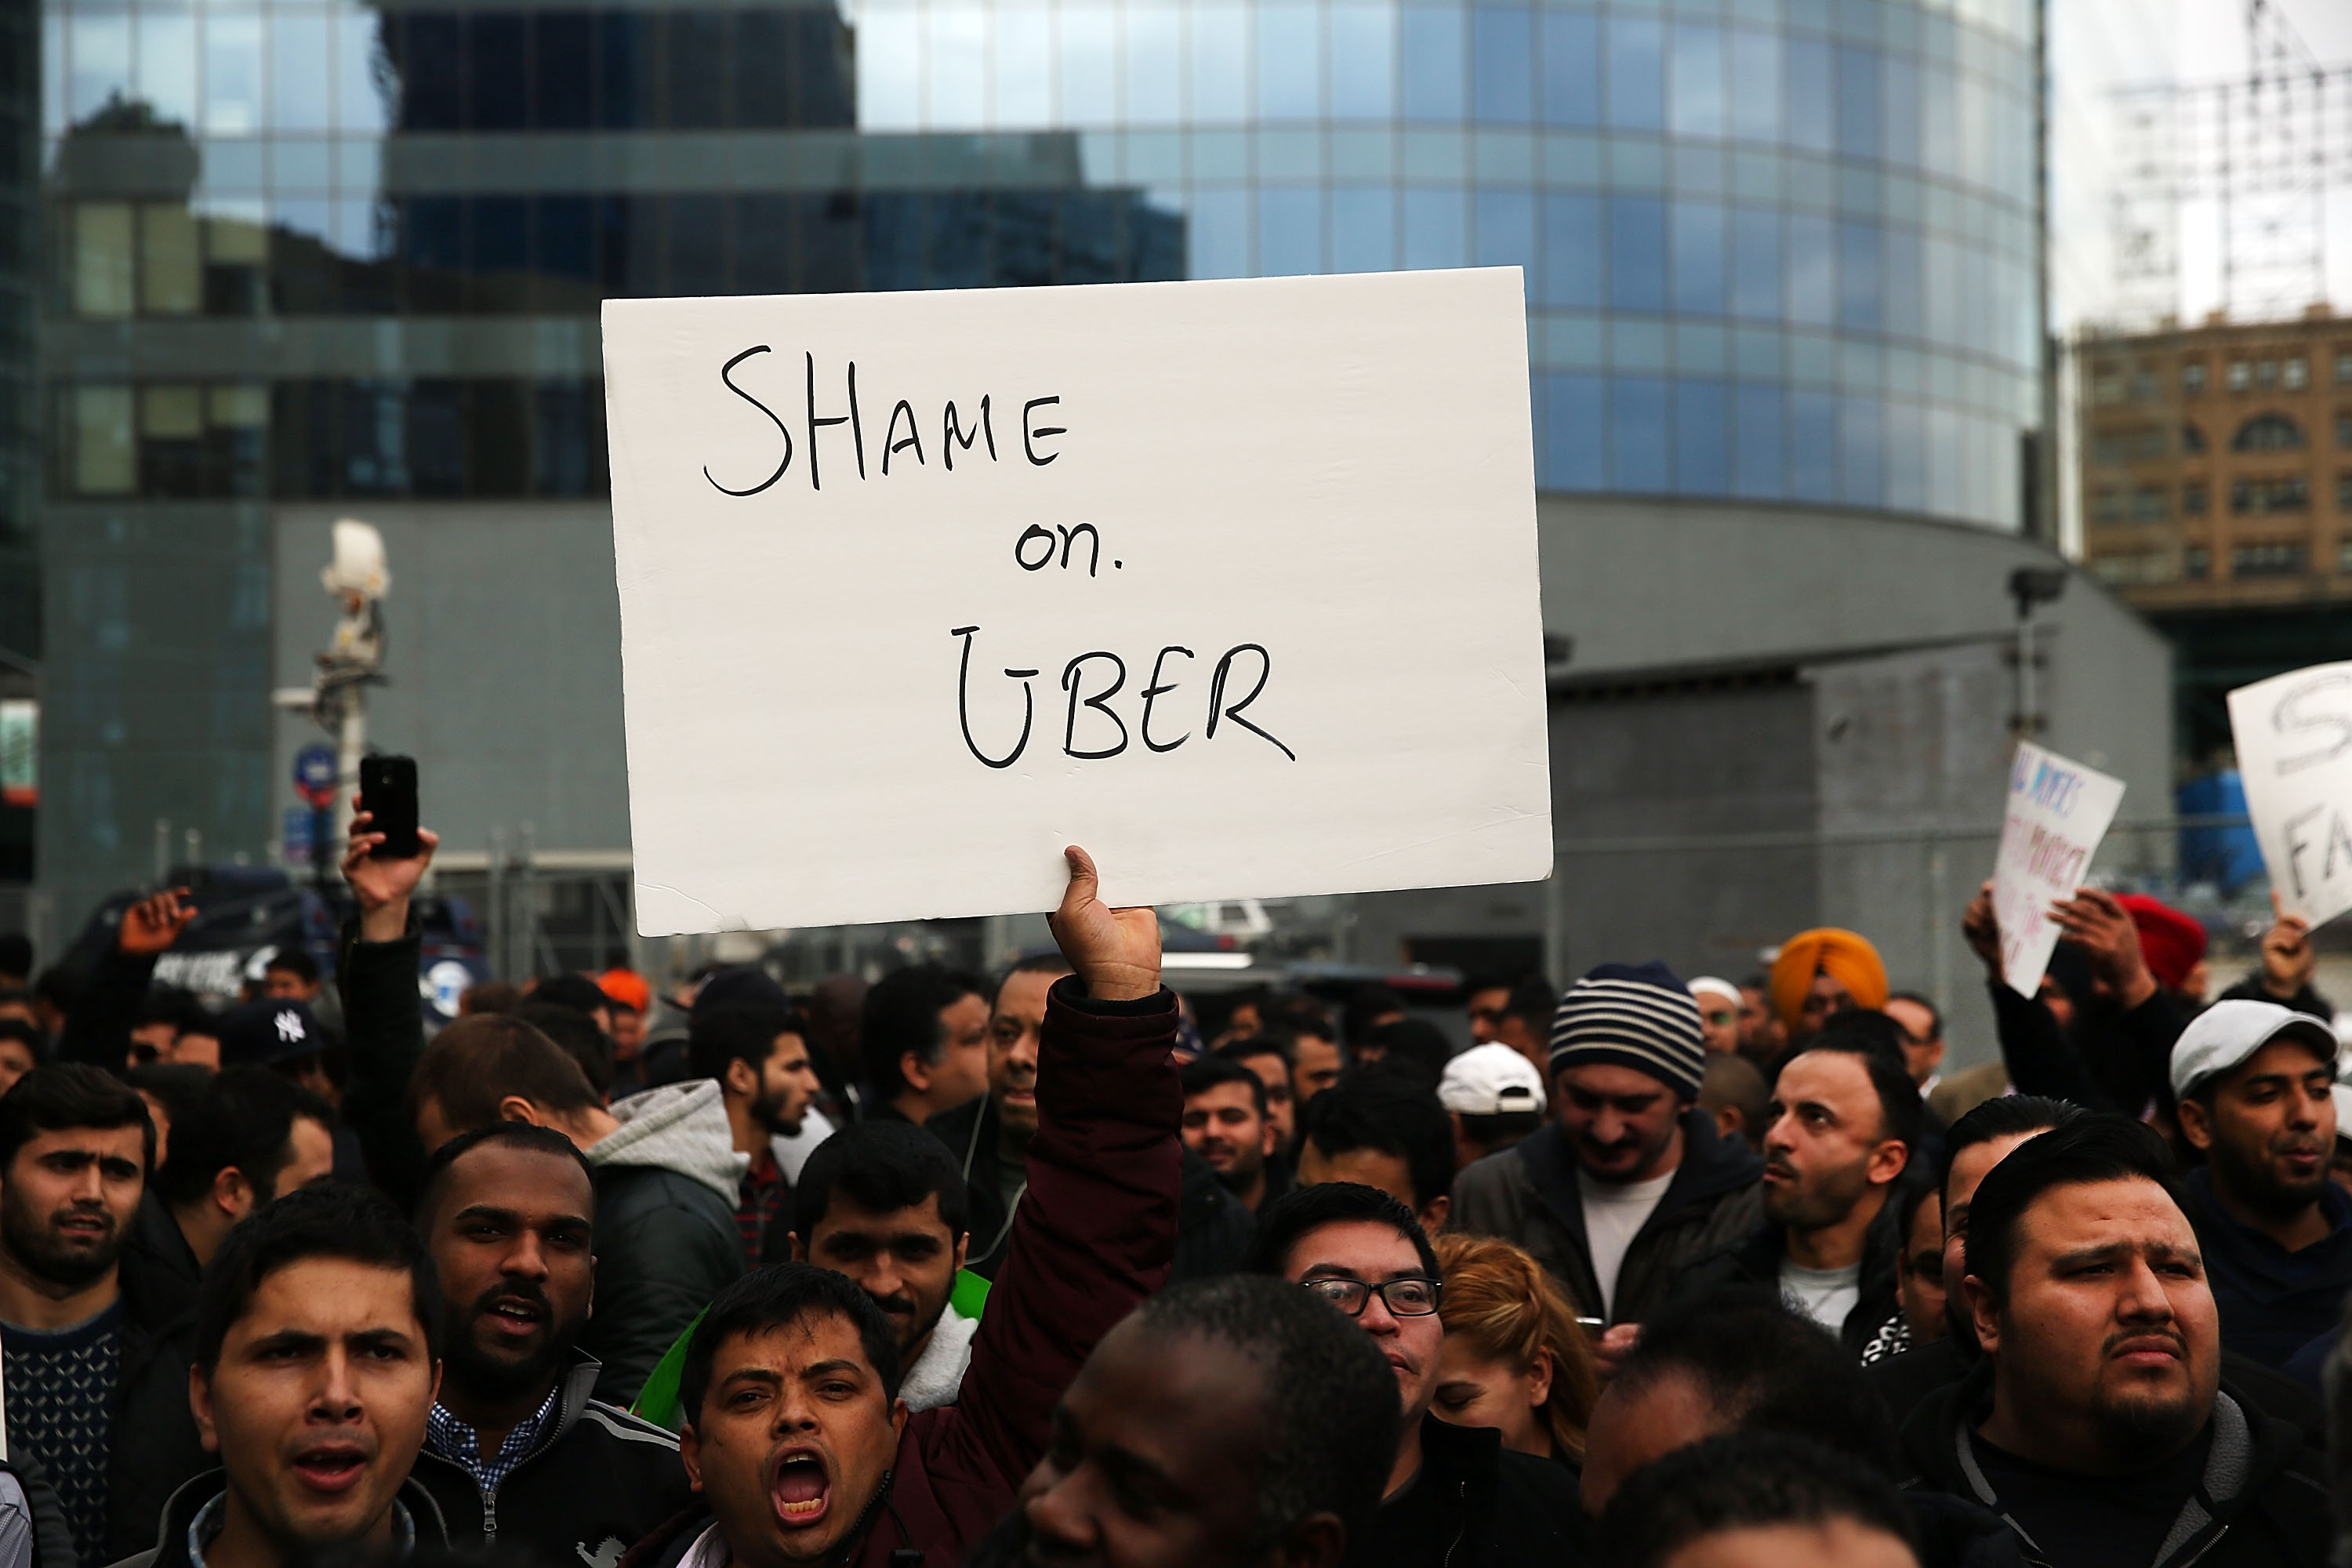 Crowd with person holding up sign that says “Shame on Uber”